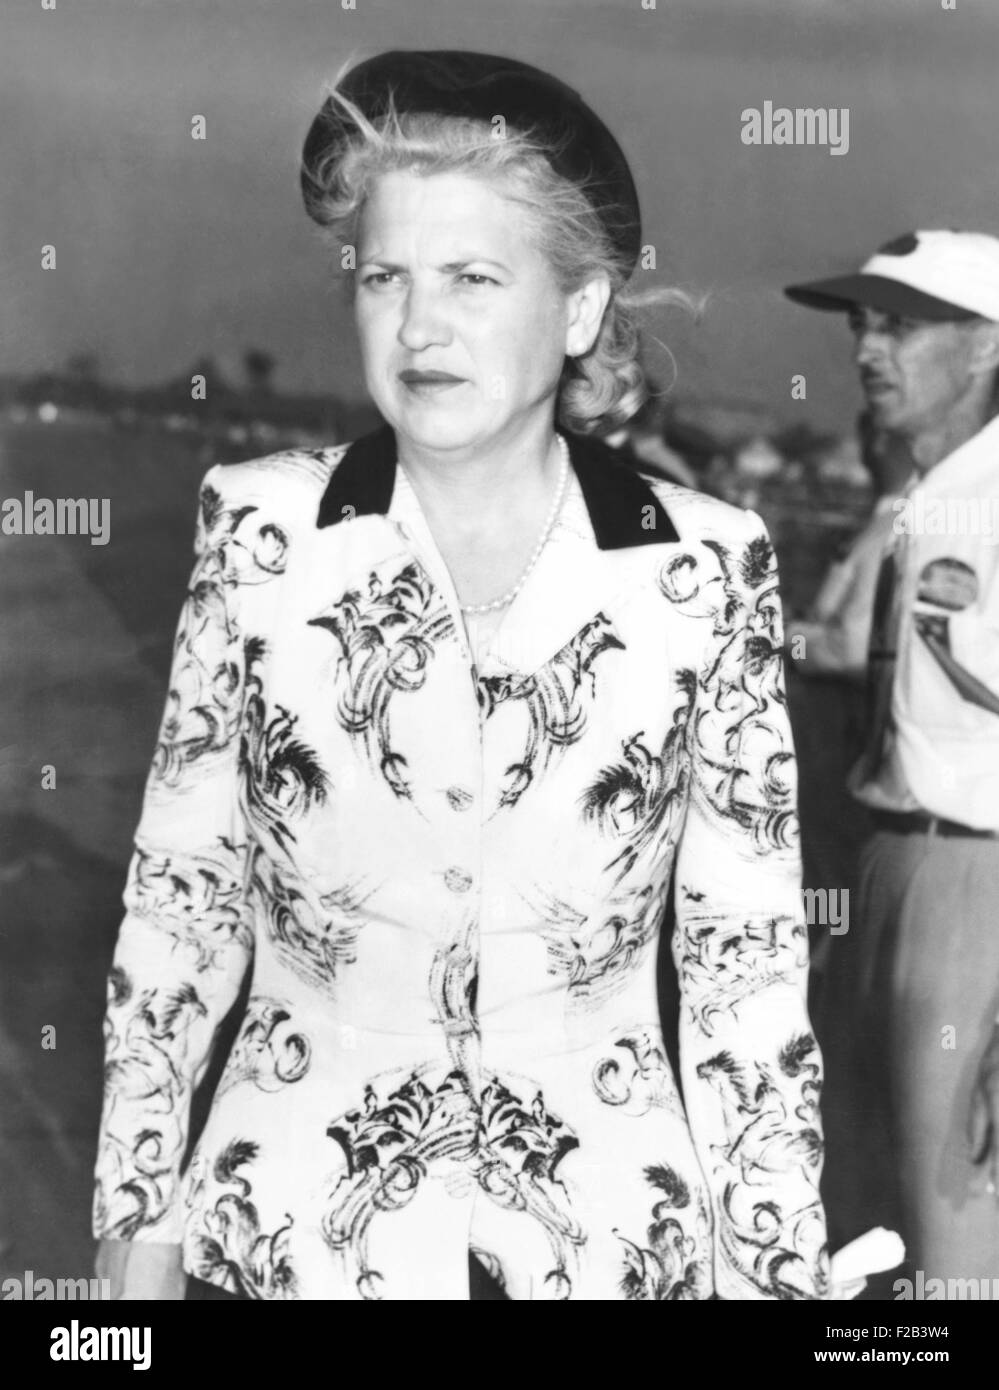 A somber Jacqueline Cochran, owner of the P-51C Mustang, that crashed in the Thompson Trophy Race. Sept 5, 1949. Pilot Bill Odum was killed, as were a young mother and her toddler, when the plane flew into a house in Berea, a suburb of Cleveland. The fatal crash contributed to the air races suspension. - (CSU 2015 5 39) Stock Photo